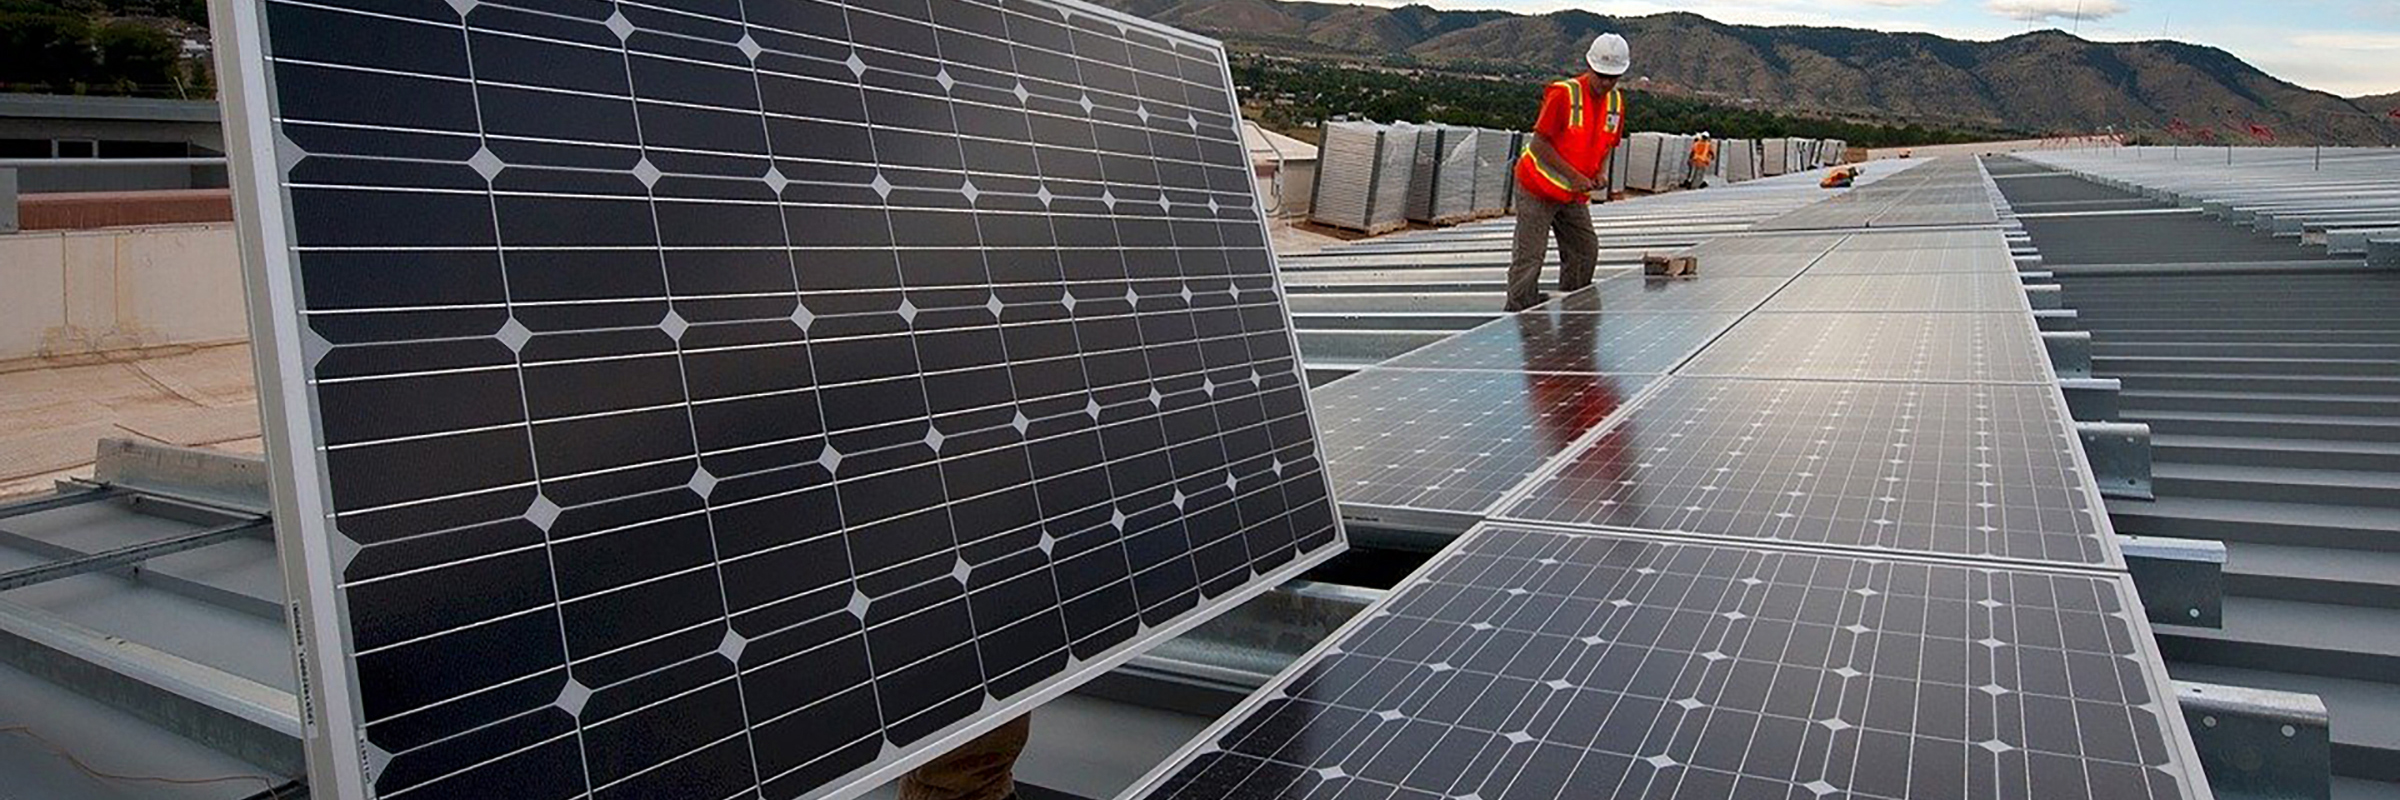 worker with solar panels